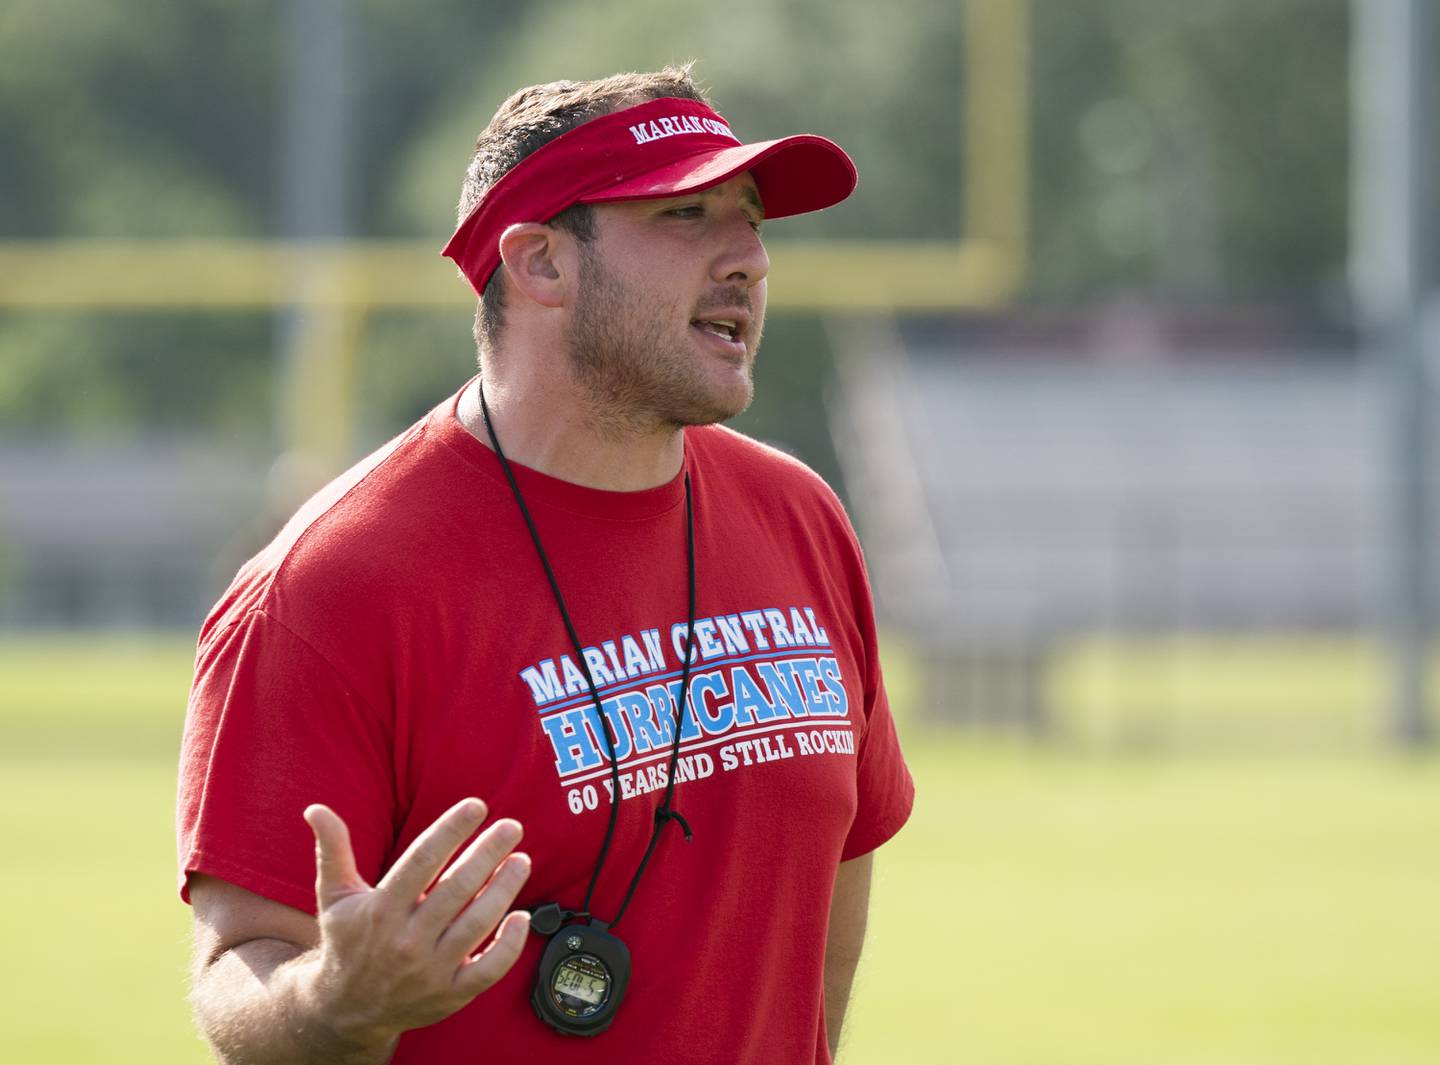 Marian Central head coach Liam Kirwan during a 7 on 7 football practice held on Thursday, July 21, 2022 at Crystal Lake Central High School. Ryan Rayburn for Shaw Local